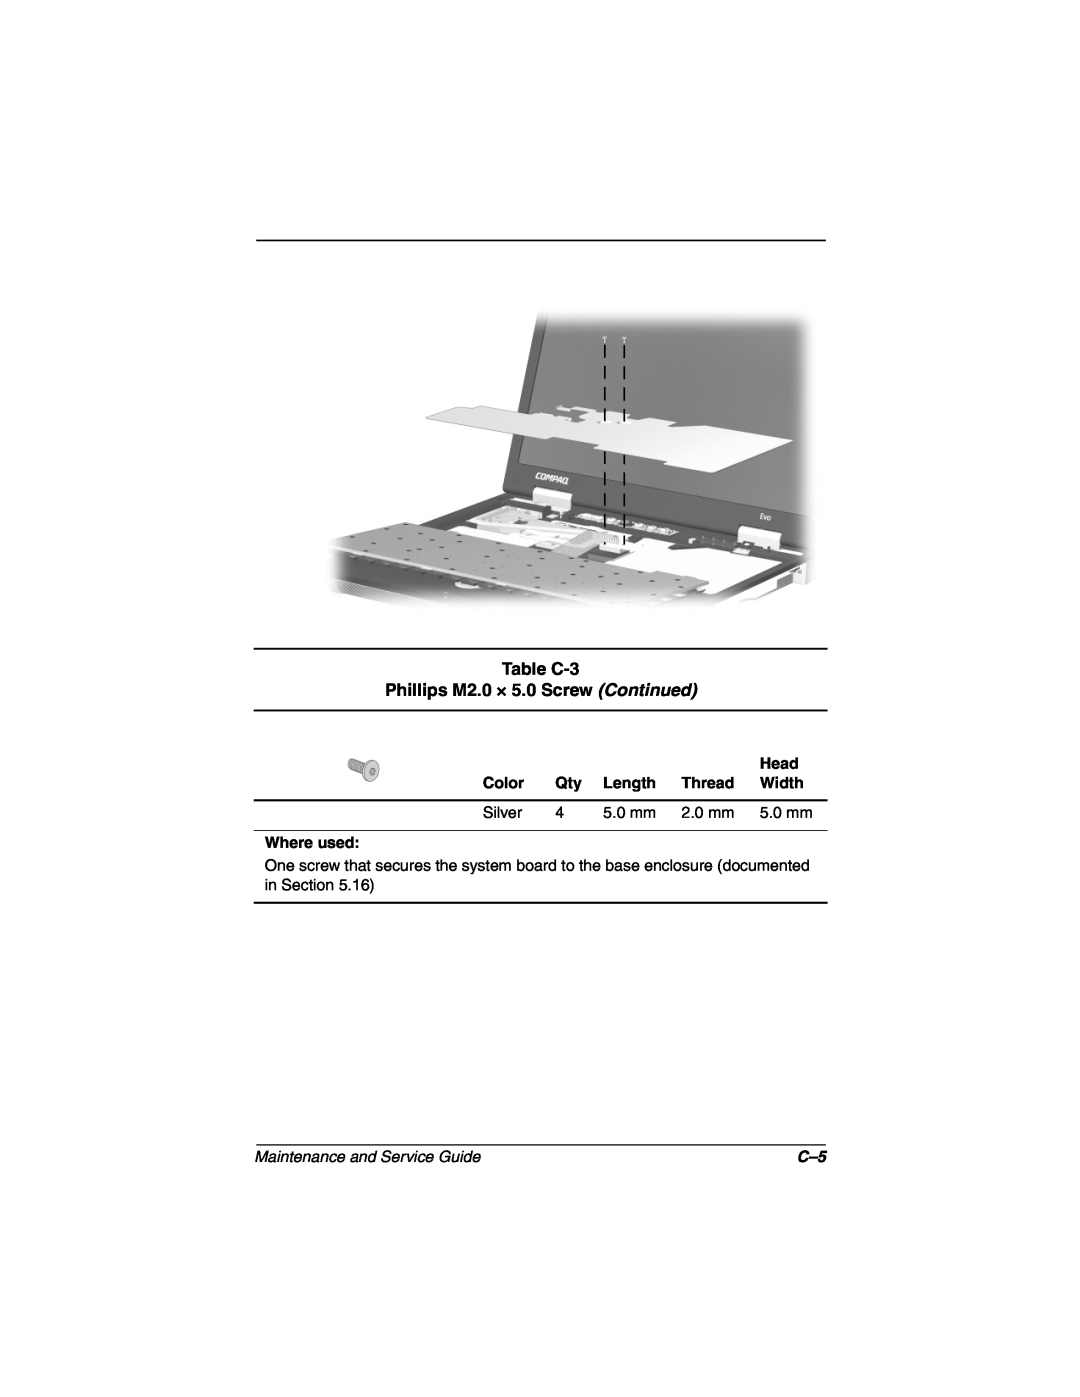 Compaq N160 manual Table C-3 Phillips M2.0 × 5.0 Screw Continued, Maintenance and Service Guide 